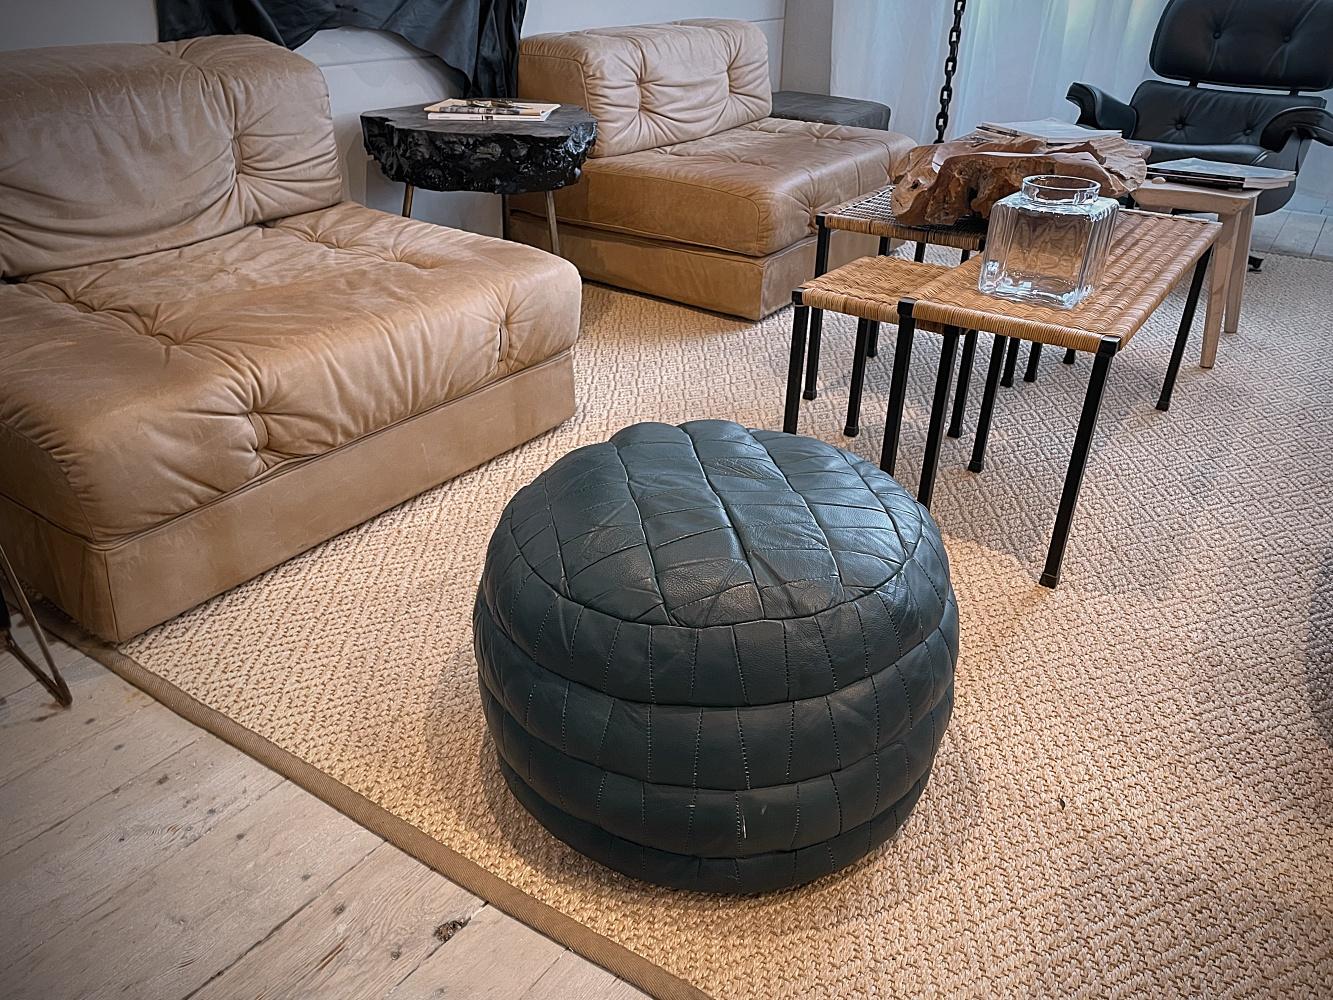 Unique and decorative handmade De Sede DS-80 pouf in British racing green. The pouf is in very good condition with lovely patina, high seating comfort.


